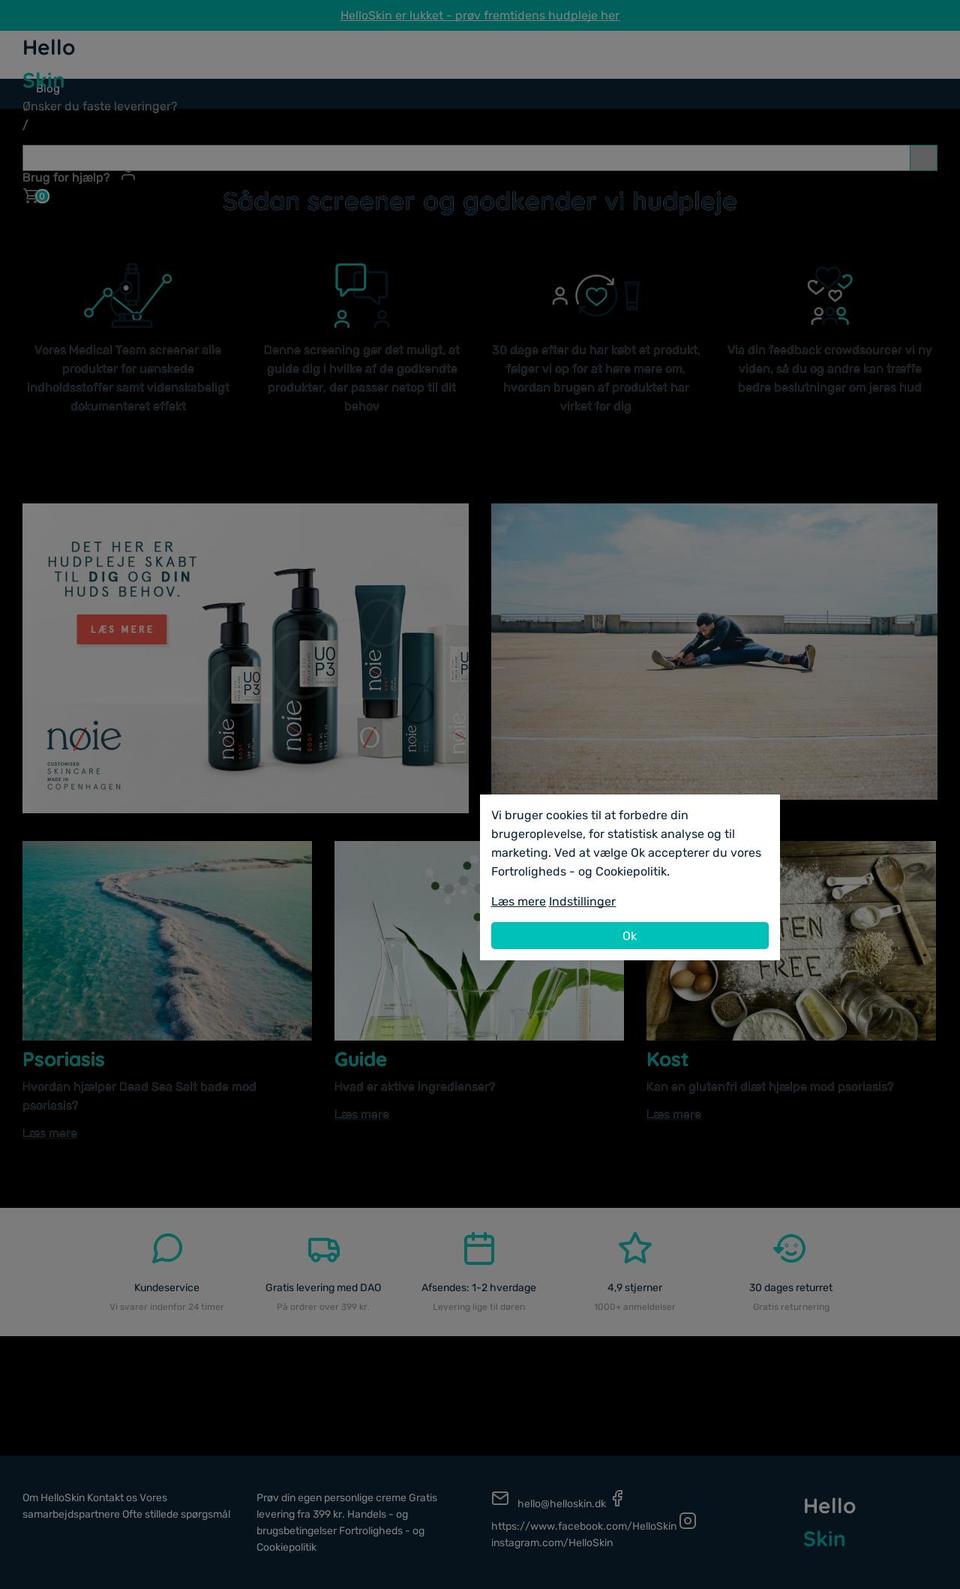 NEW VERSION Shopify theme site example helloskin.dk